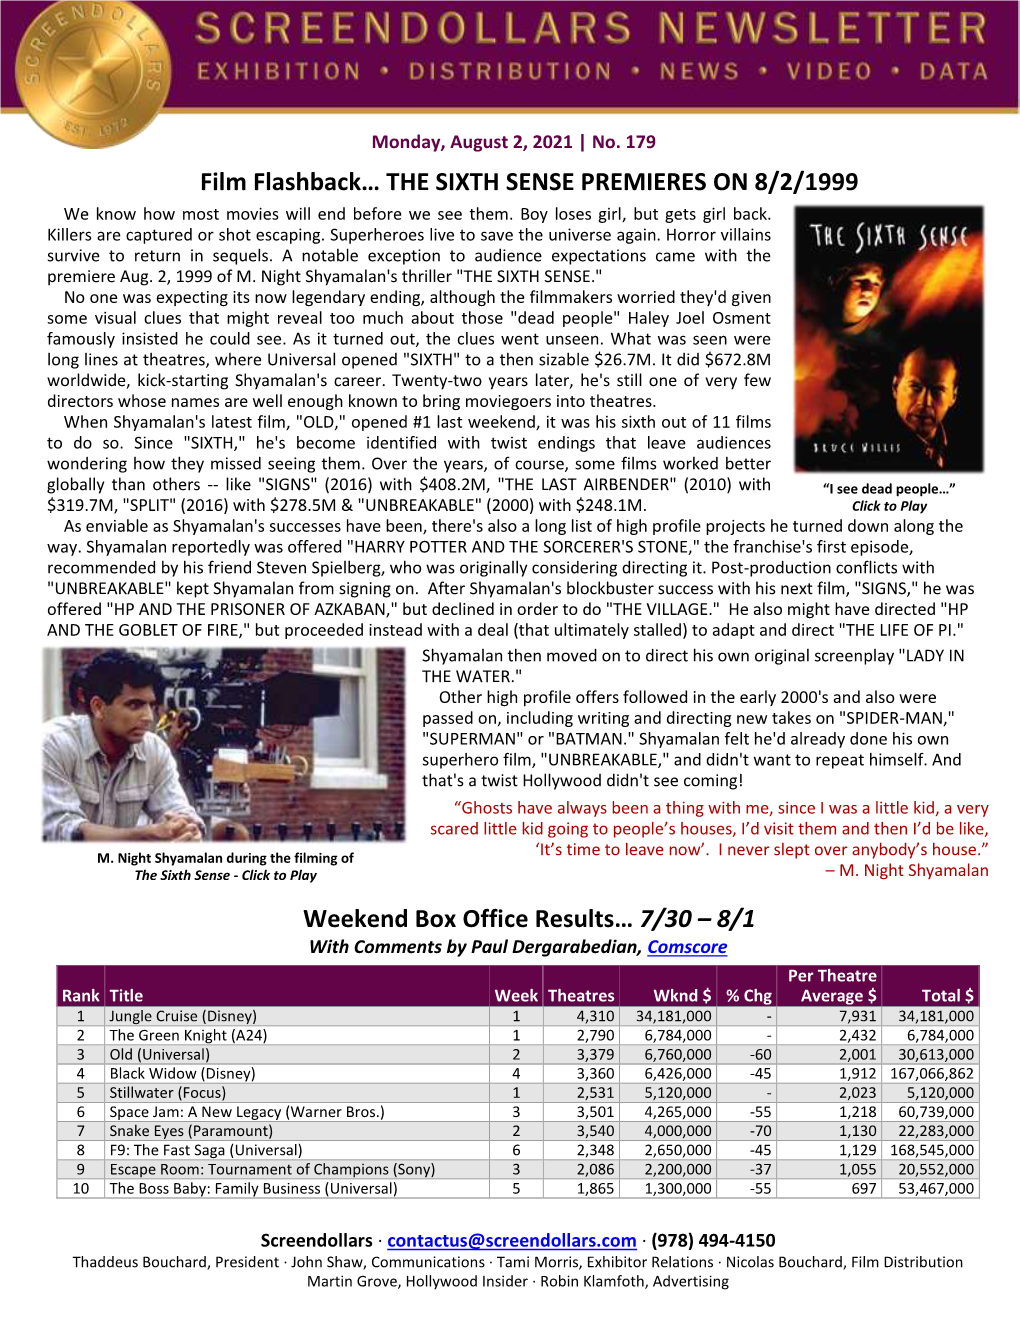 Film Flashback… the SIXTH SENSE PREMIERES on 8/2/1999 We Know How Most Movies Will End Before We See Them